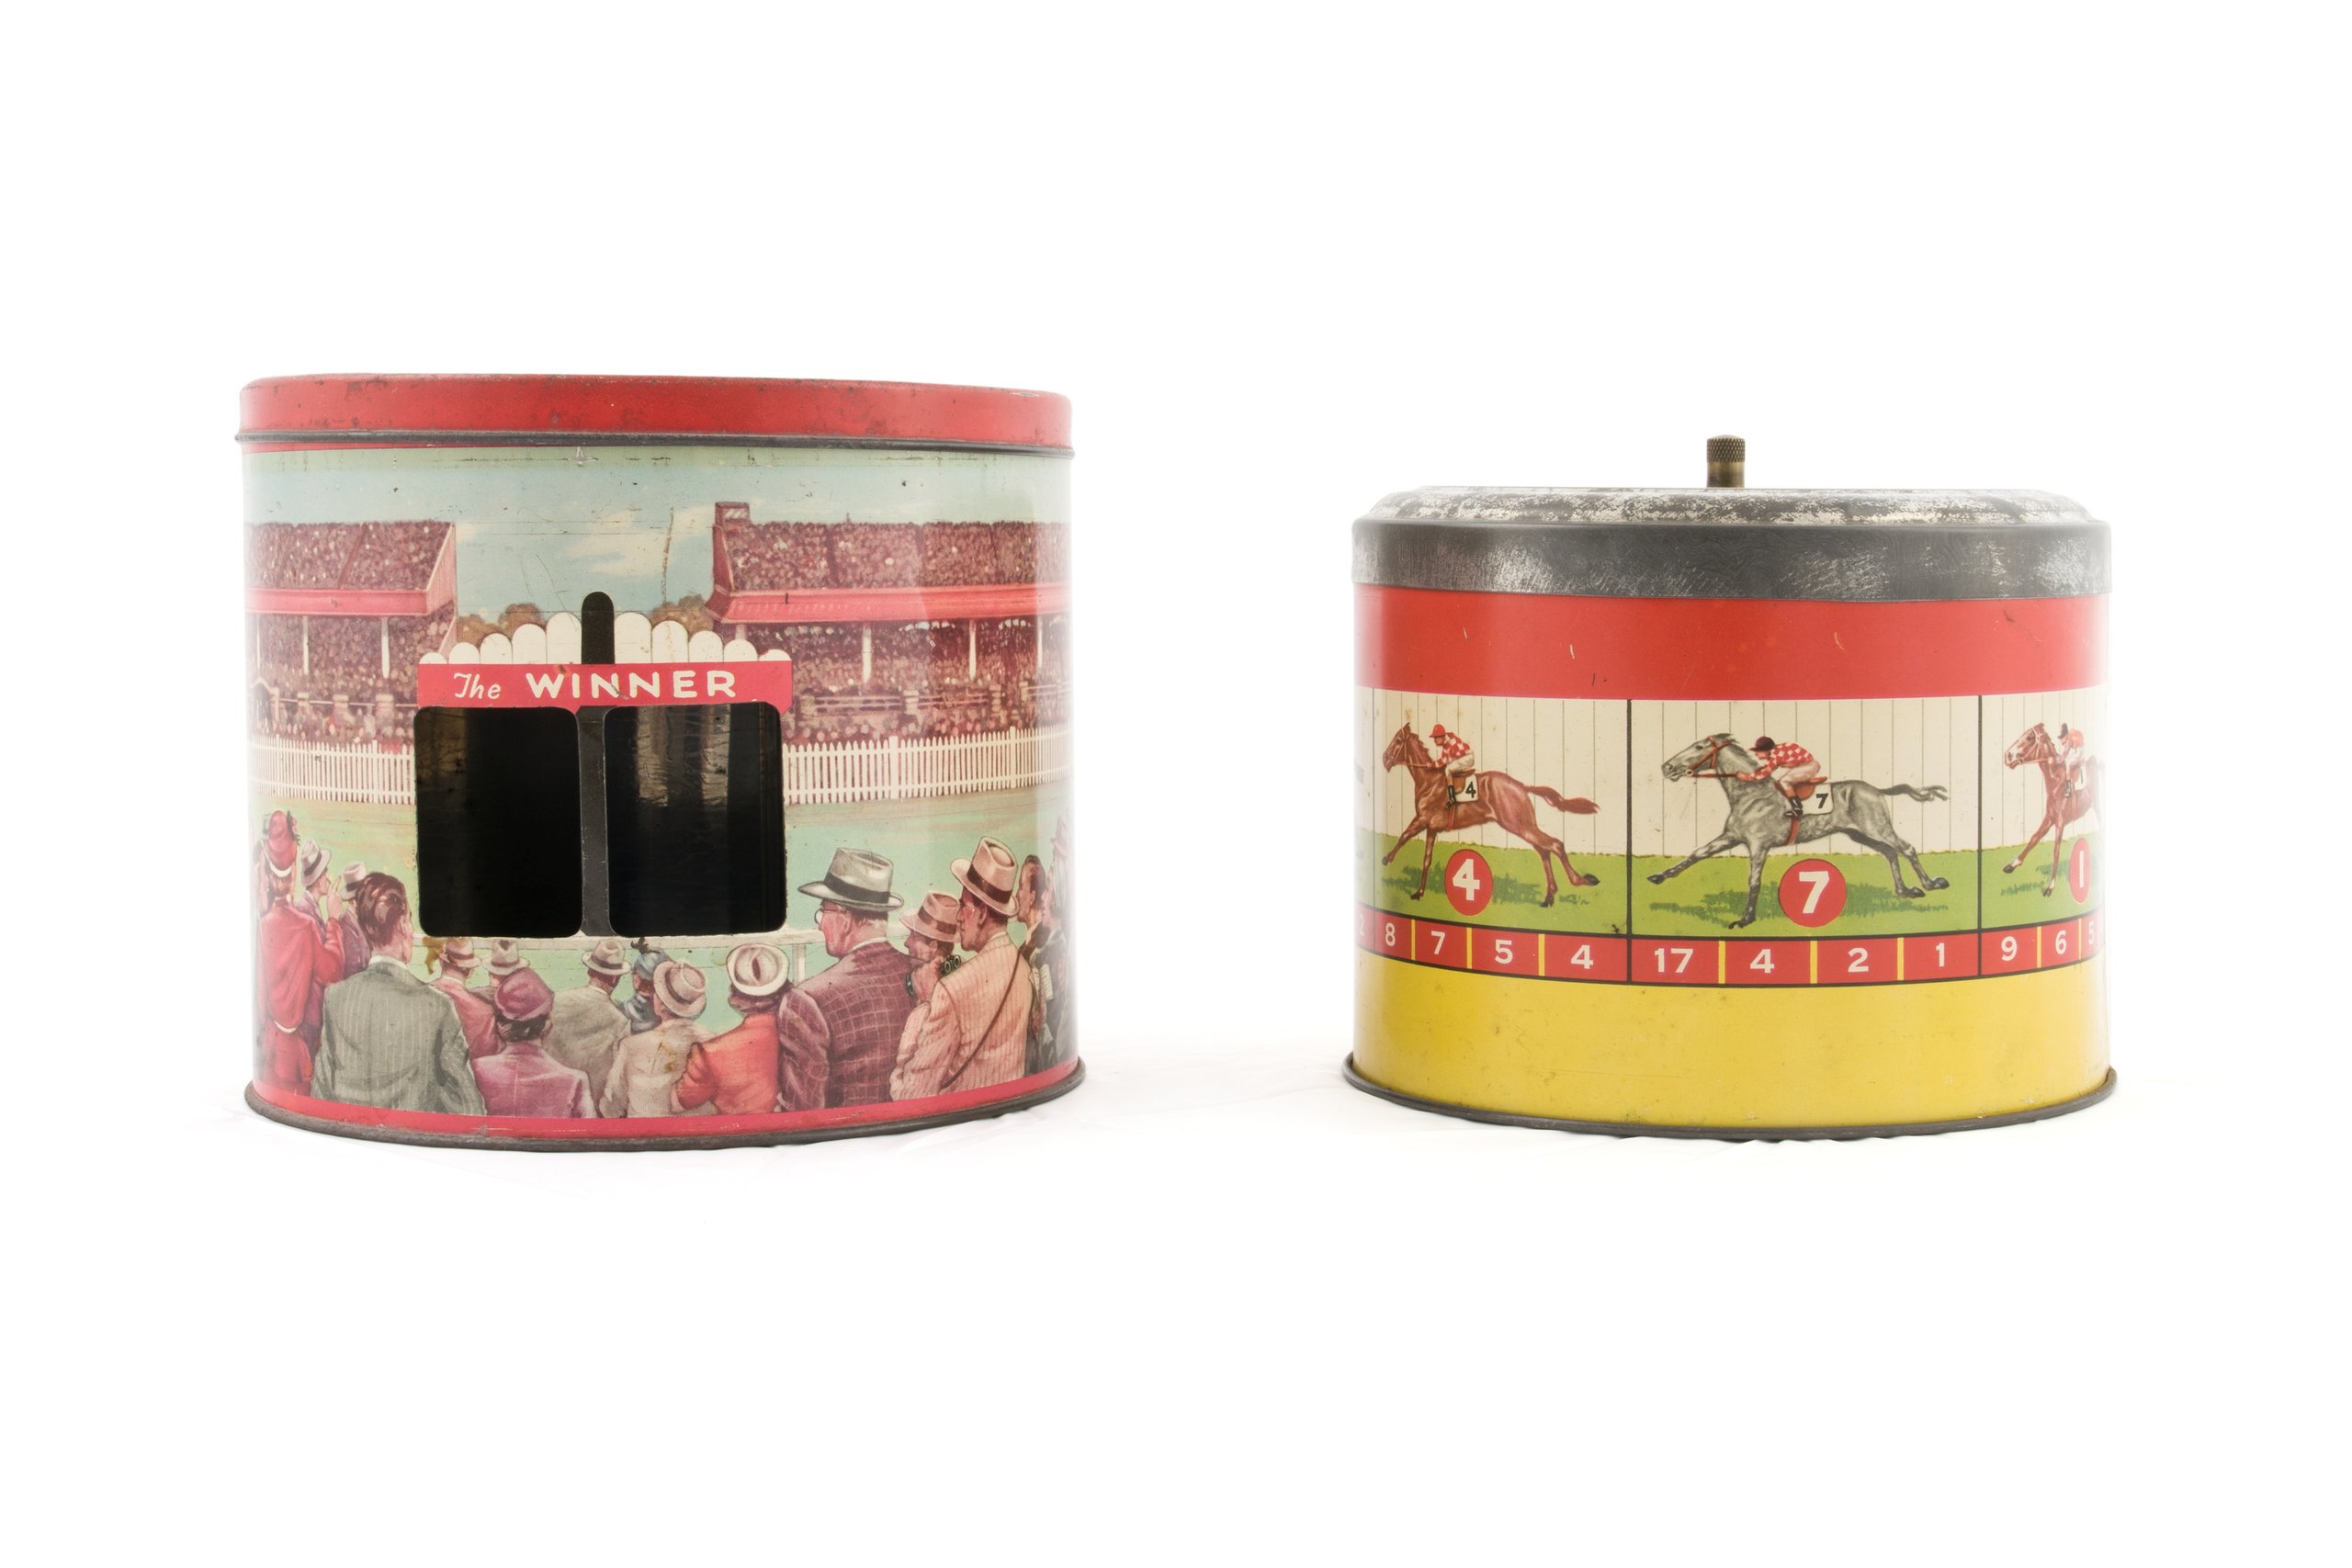 Powerhouse Collection - 'The Winner' biscuit tin by Peek Frean